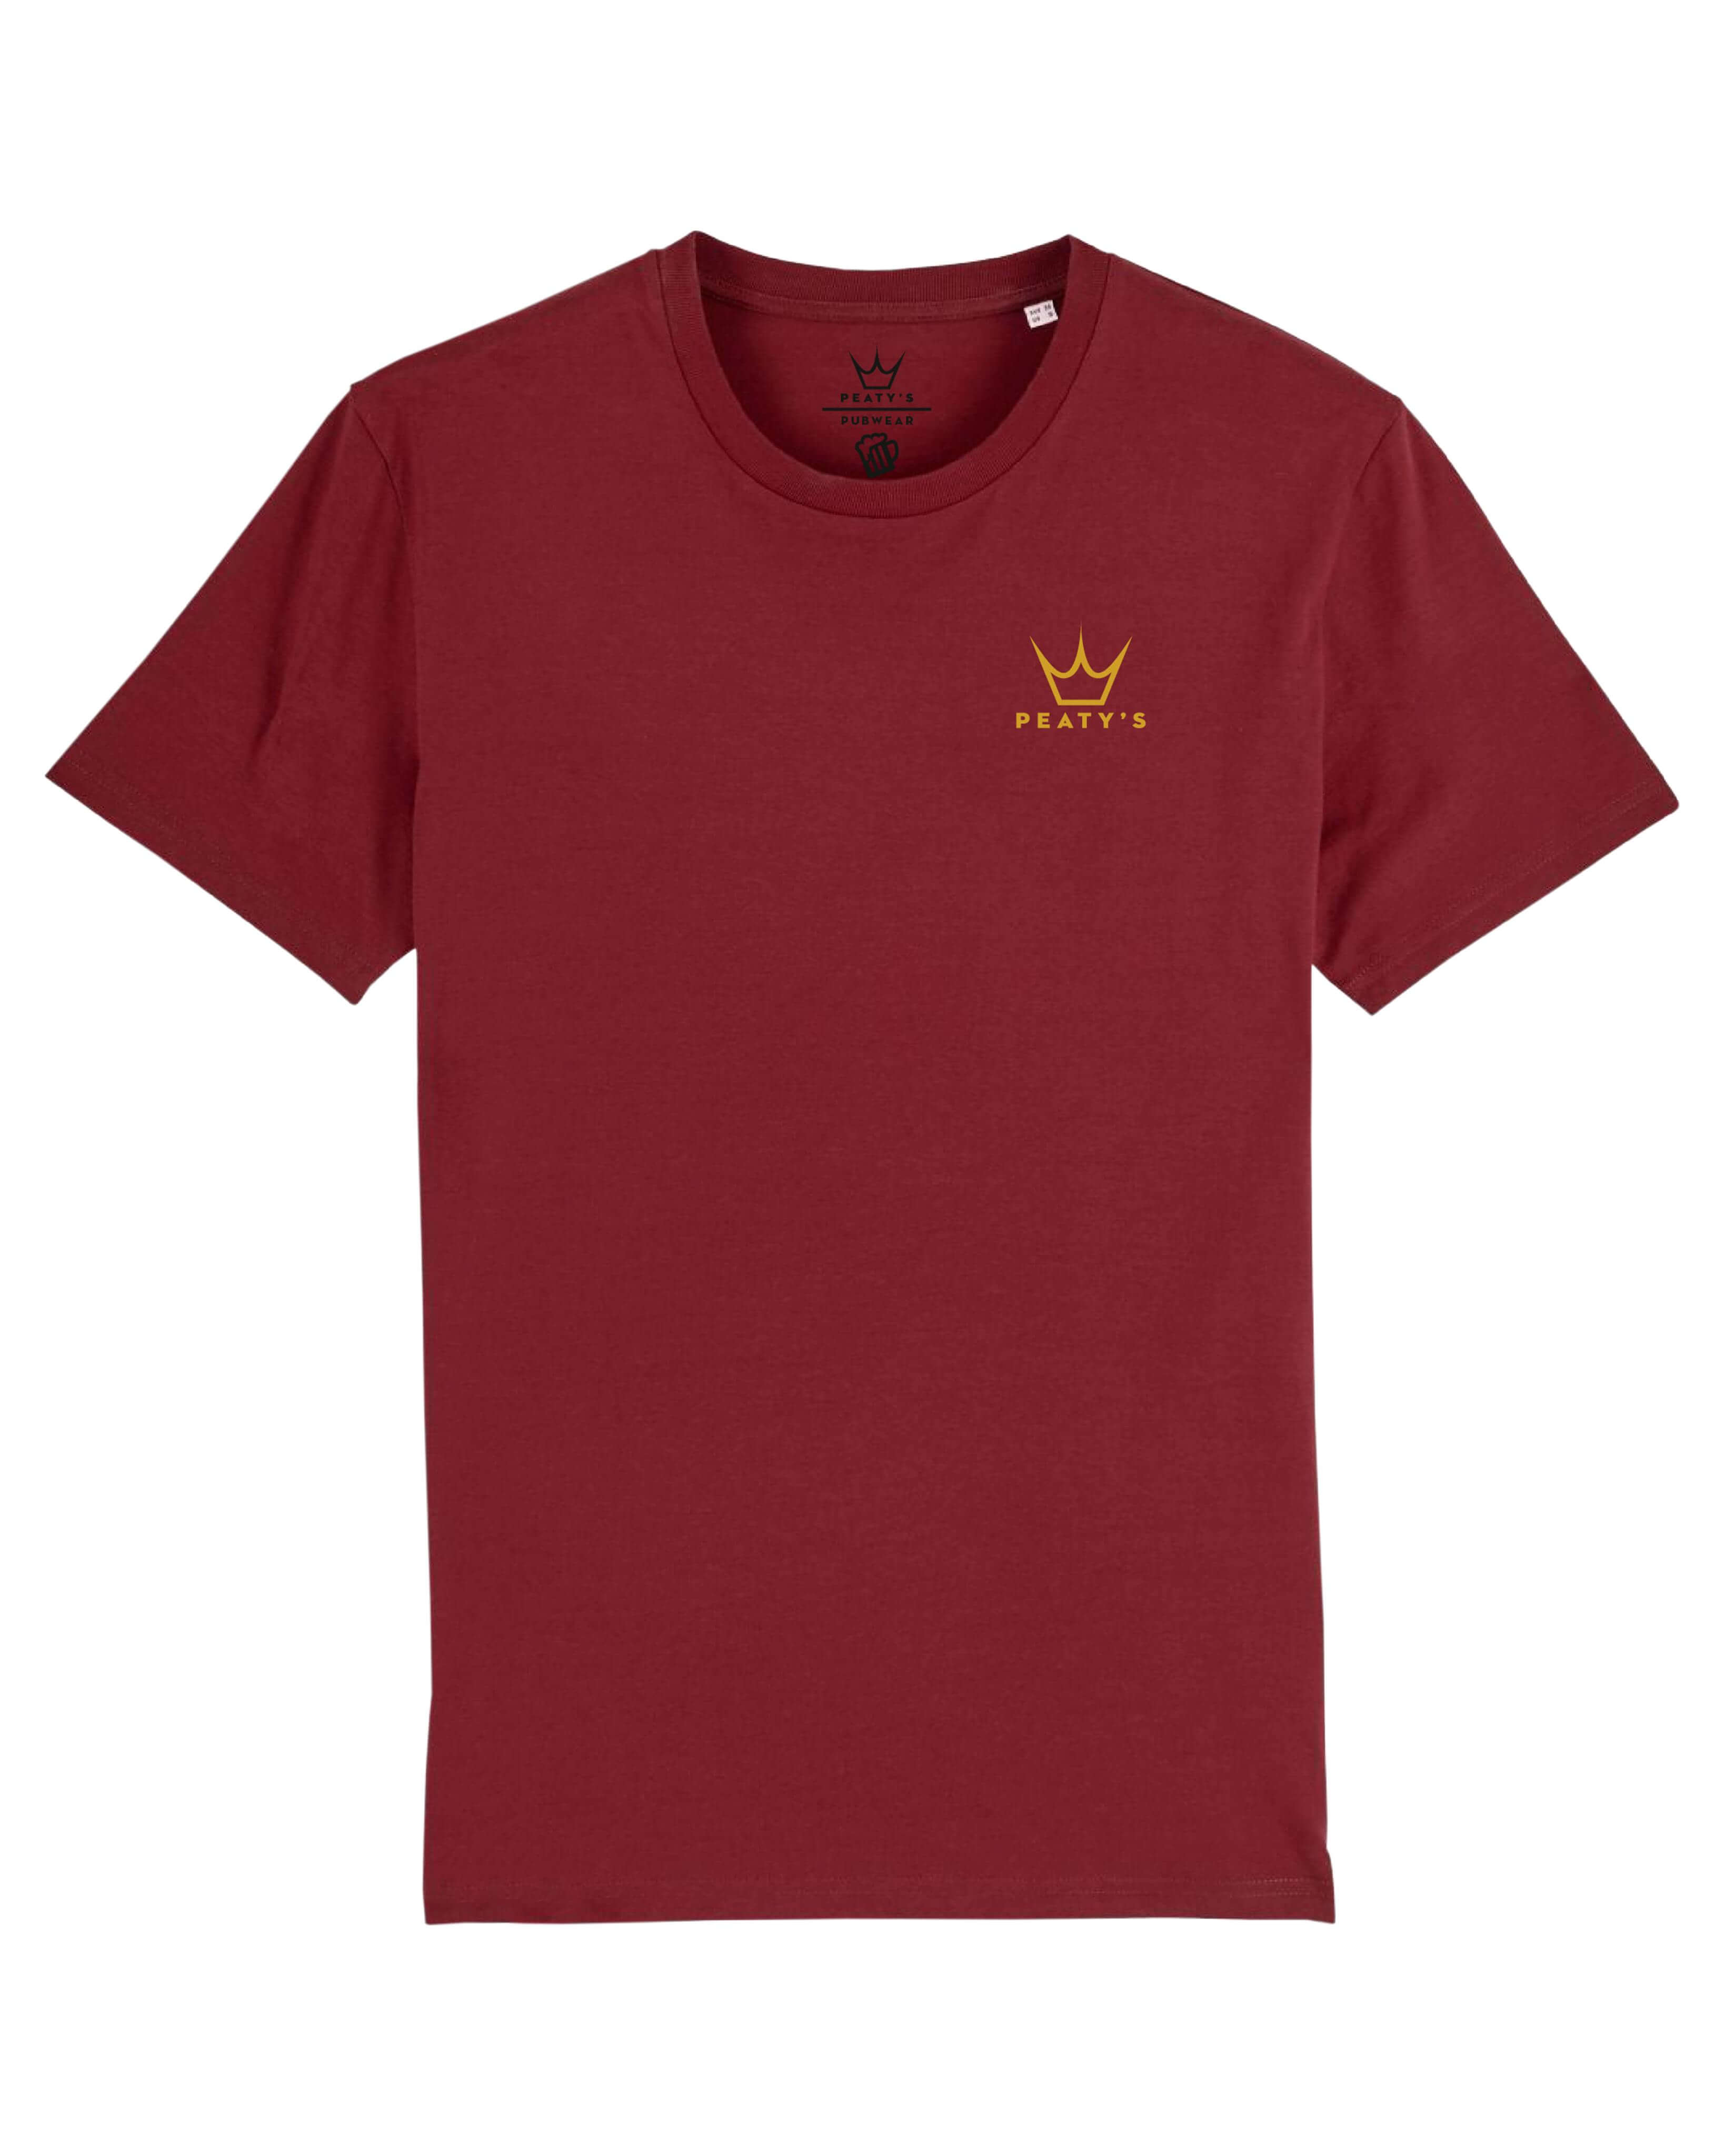 Pubwear T-Shirts - Nowt A Beer Can_t Fix - Burgundy Front.jpg